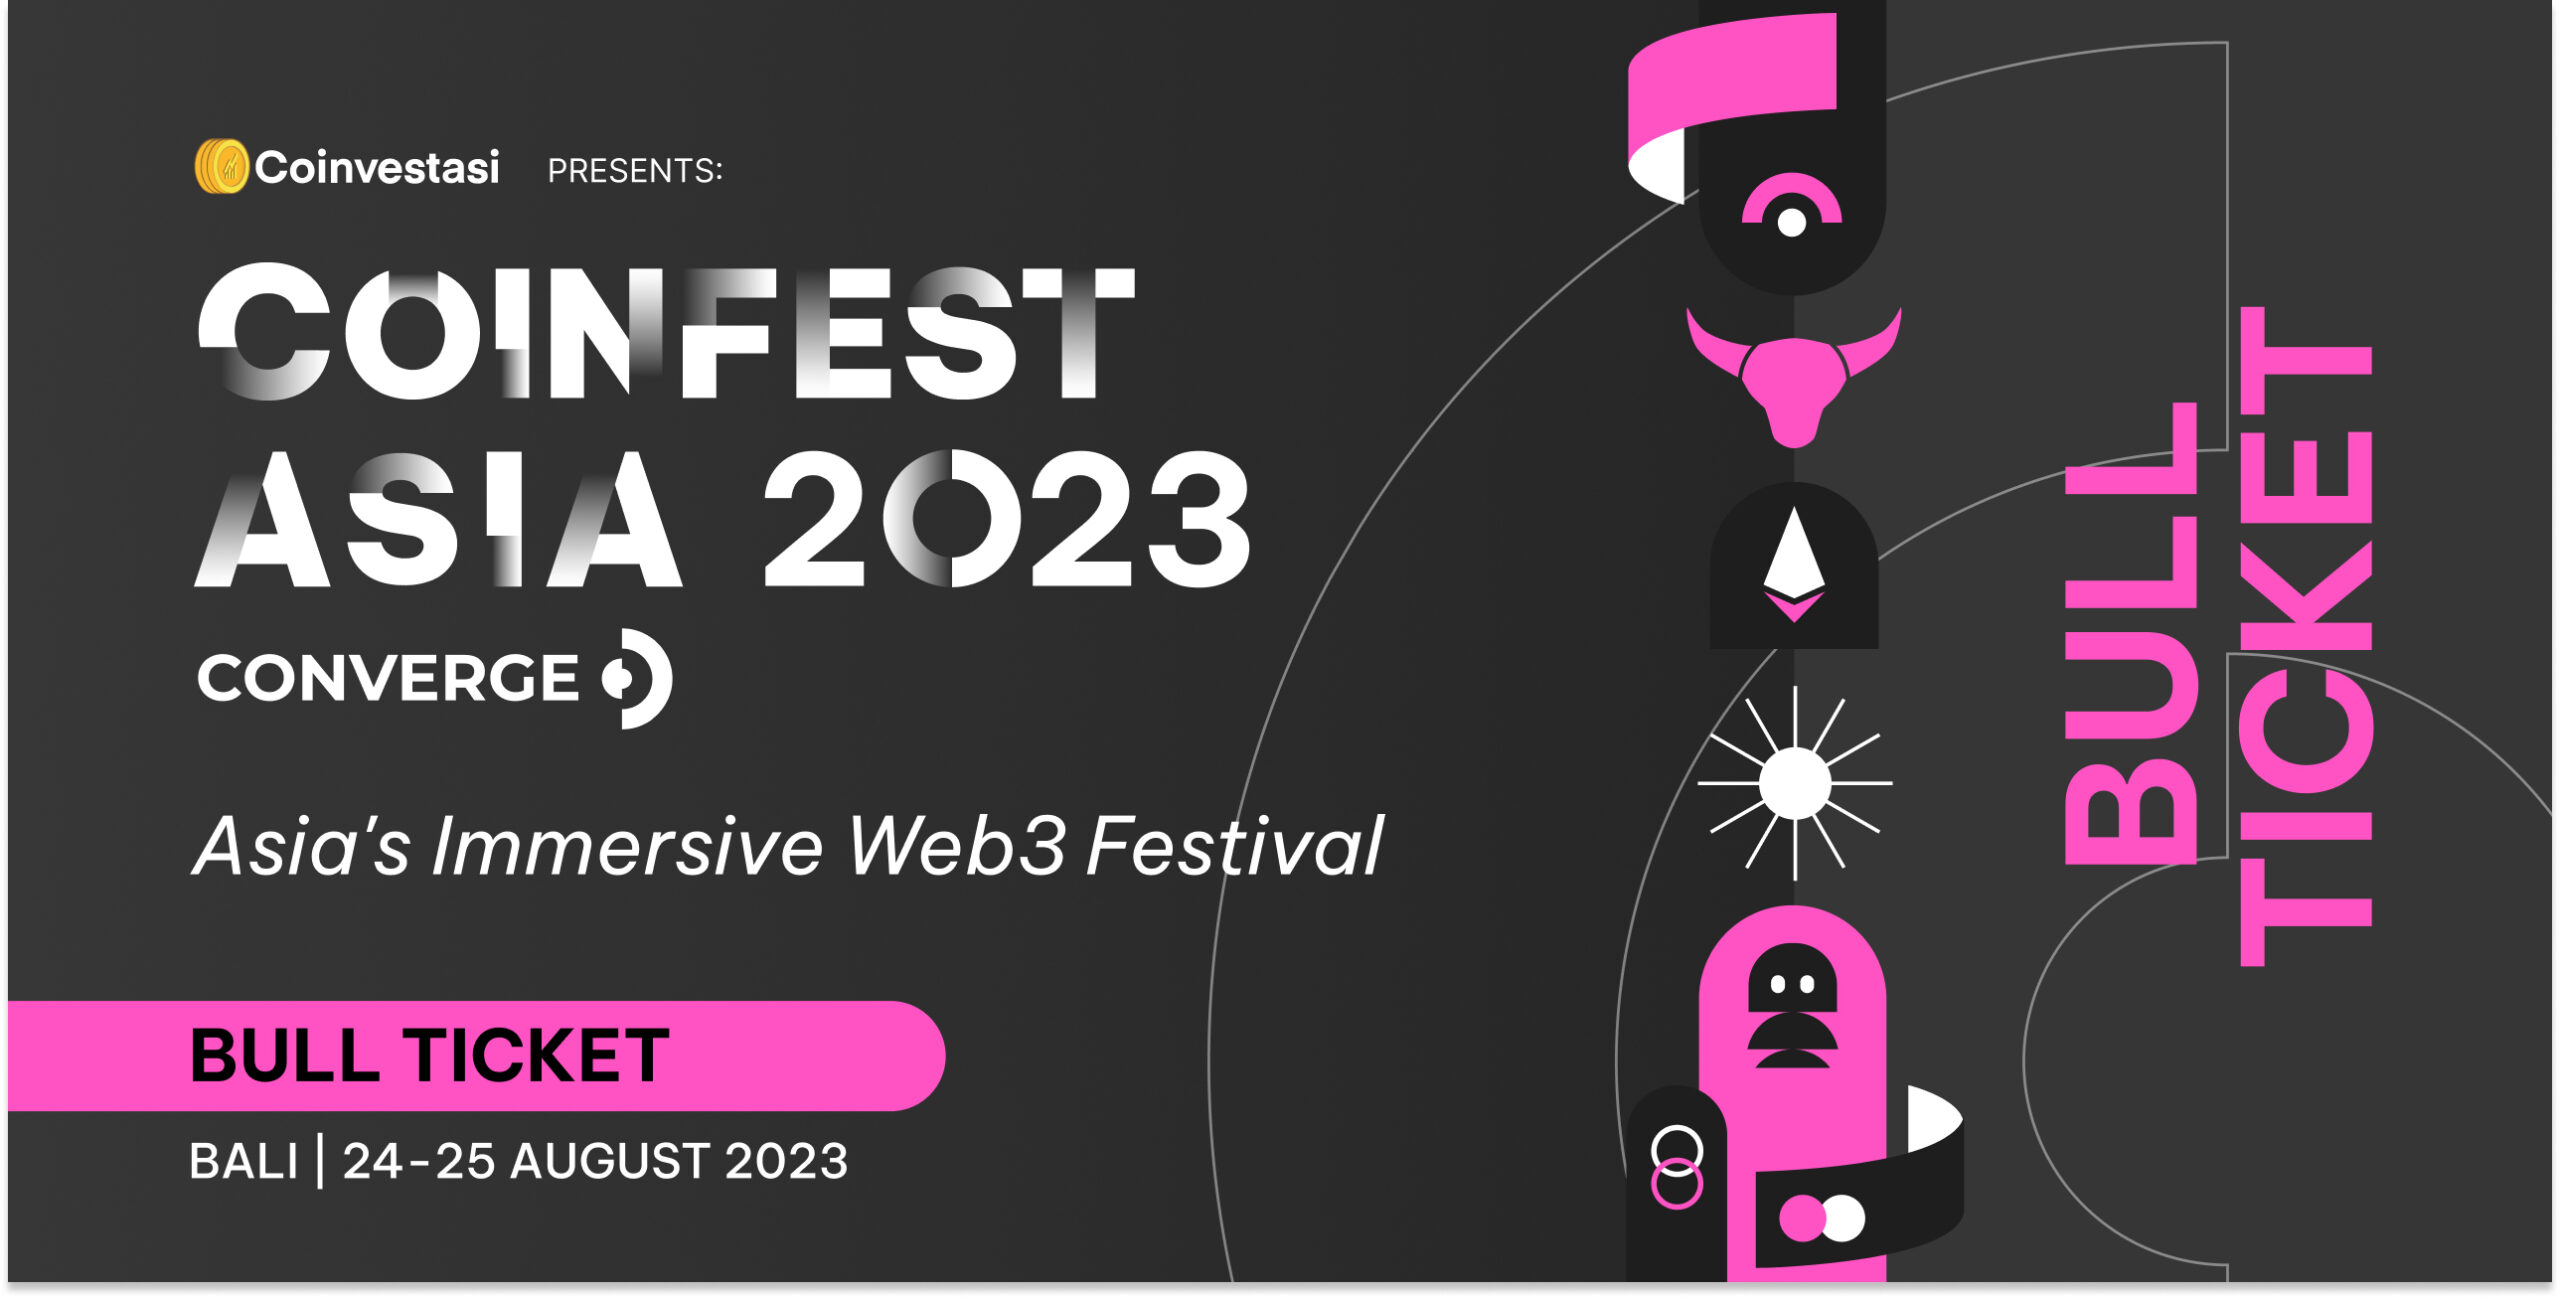 Coinfest Asia (Bull Ticket Ticket)